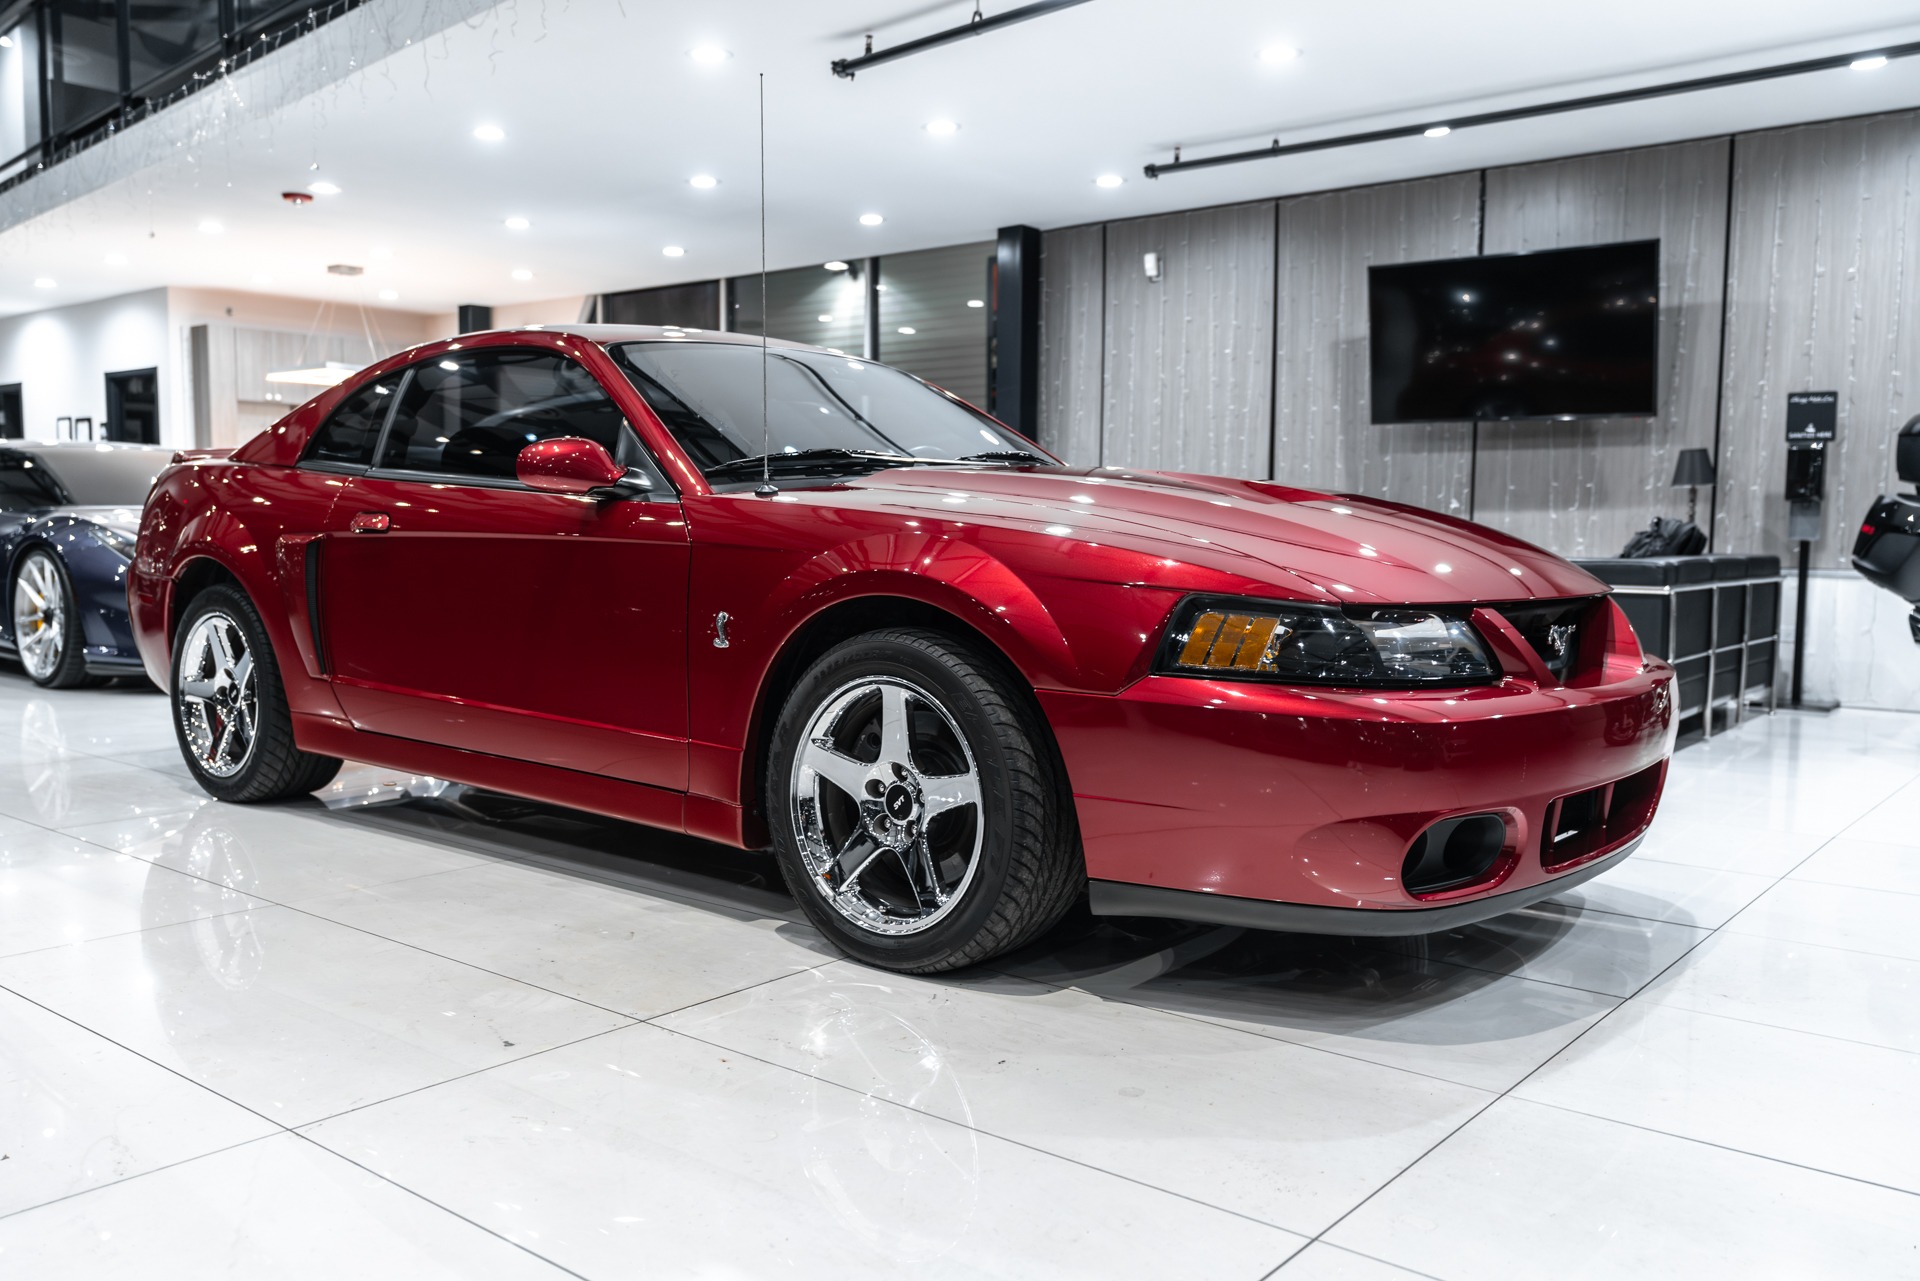 Used-2004-Ford-Mustang-SVT-Cobra-Coupe-Terminator-ONLY-14k-Miles-6-Speed-Manual-Collector-Condition